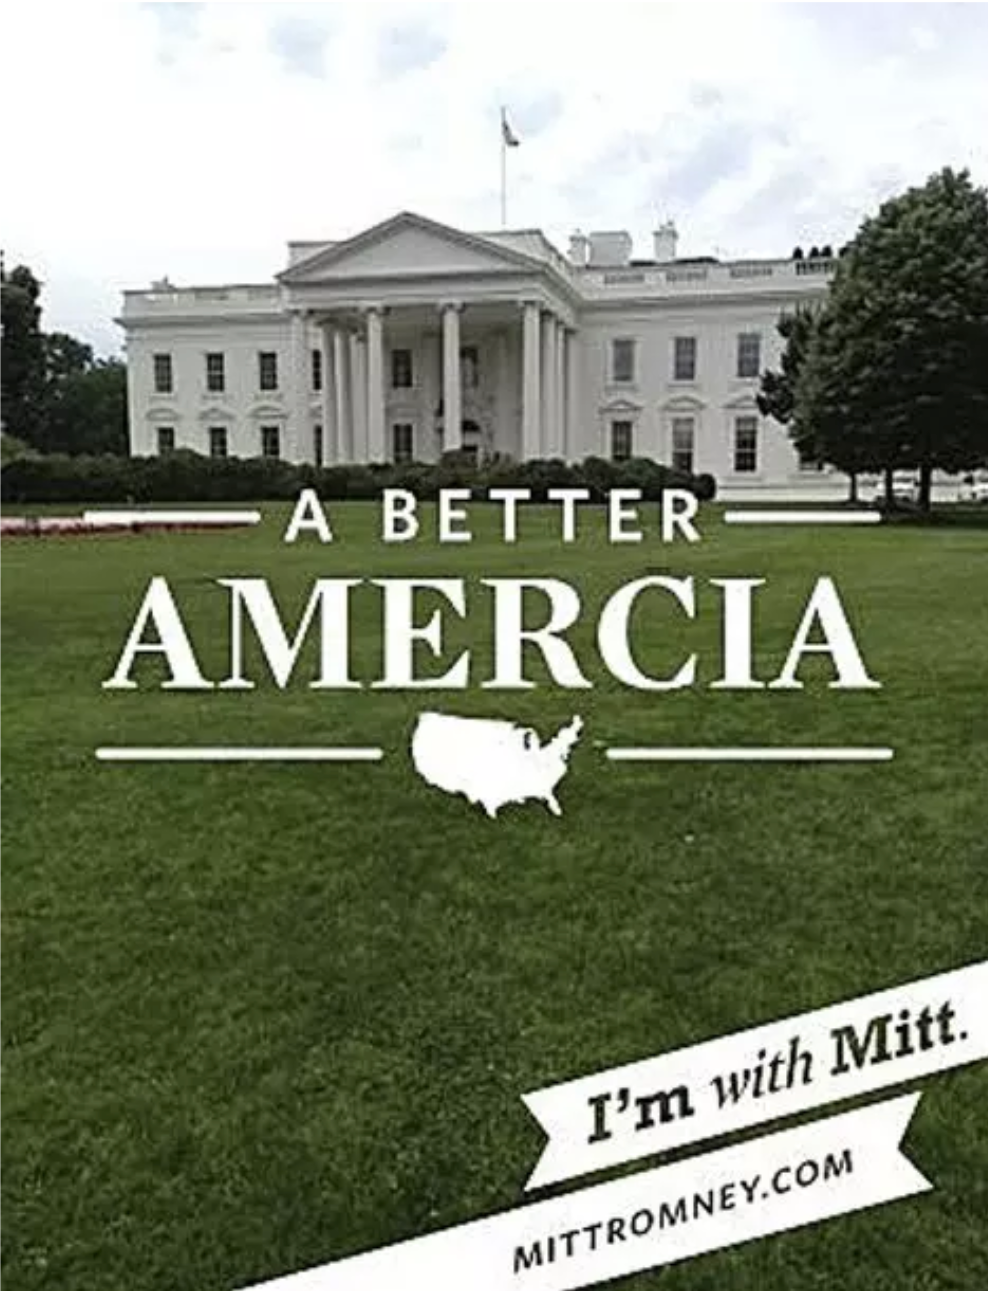 A campaign ad for Mitt Romney in which the word “America” is misspelled.